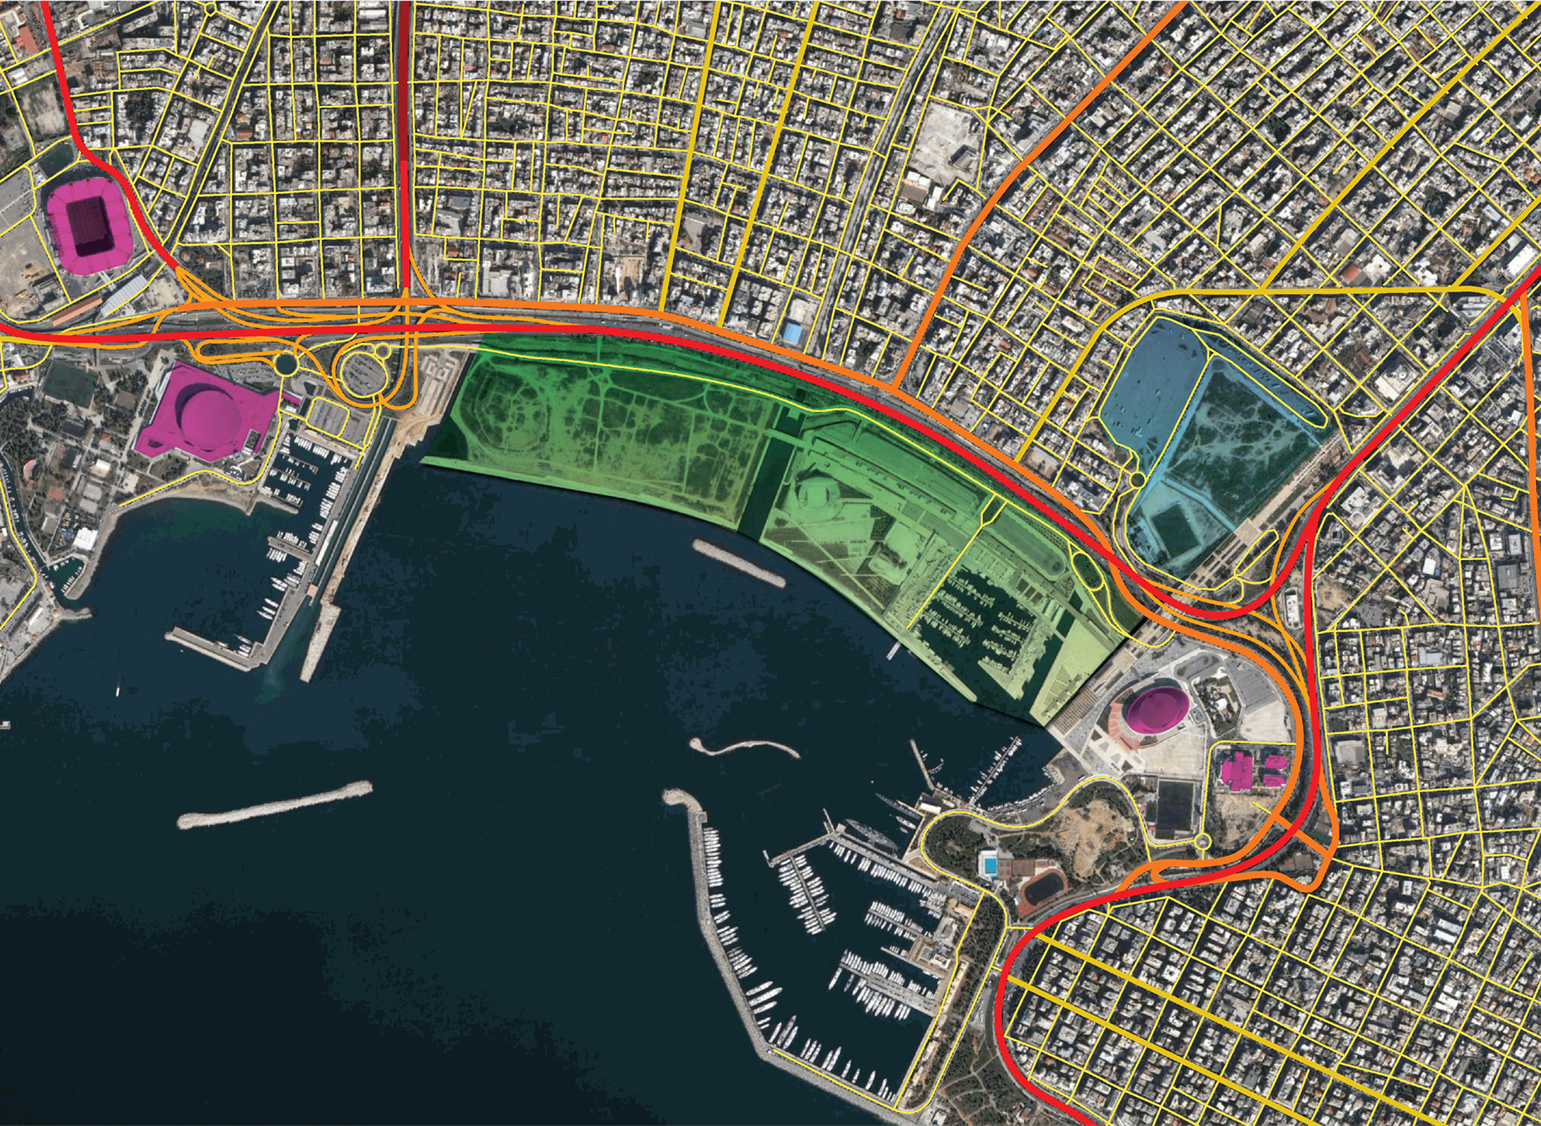 Systematica-Athens Waterfront Regeneration-Main Road Network